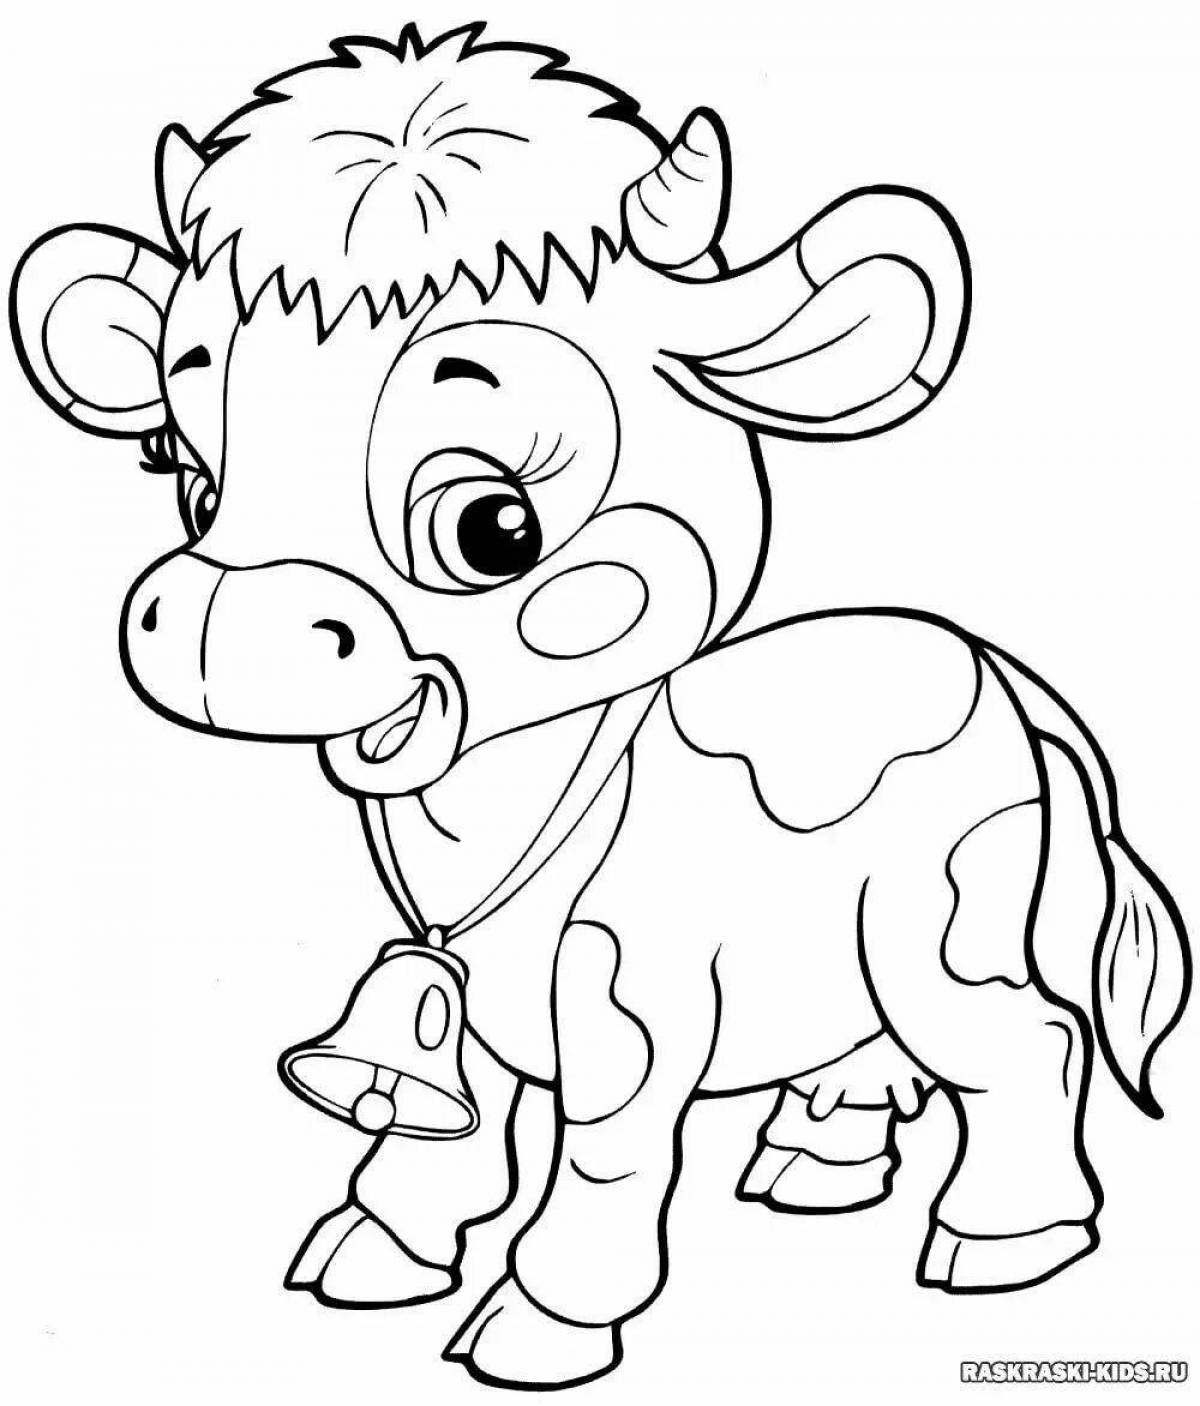 Humorous cow coloring book for 4-5 year olds